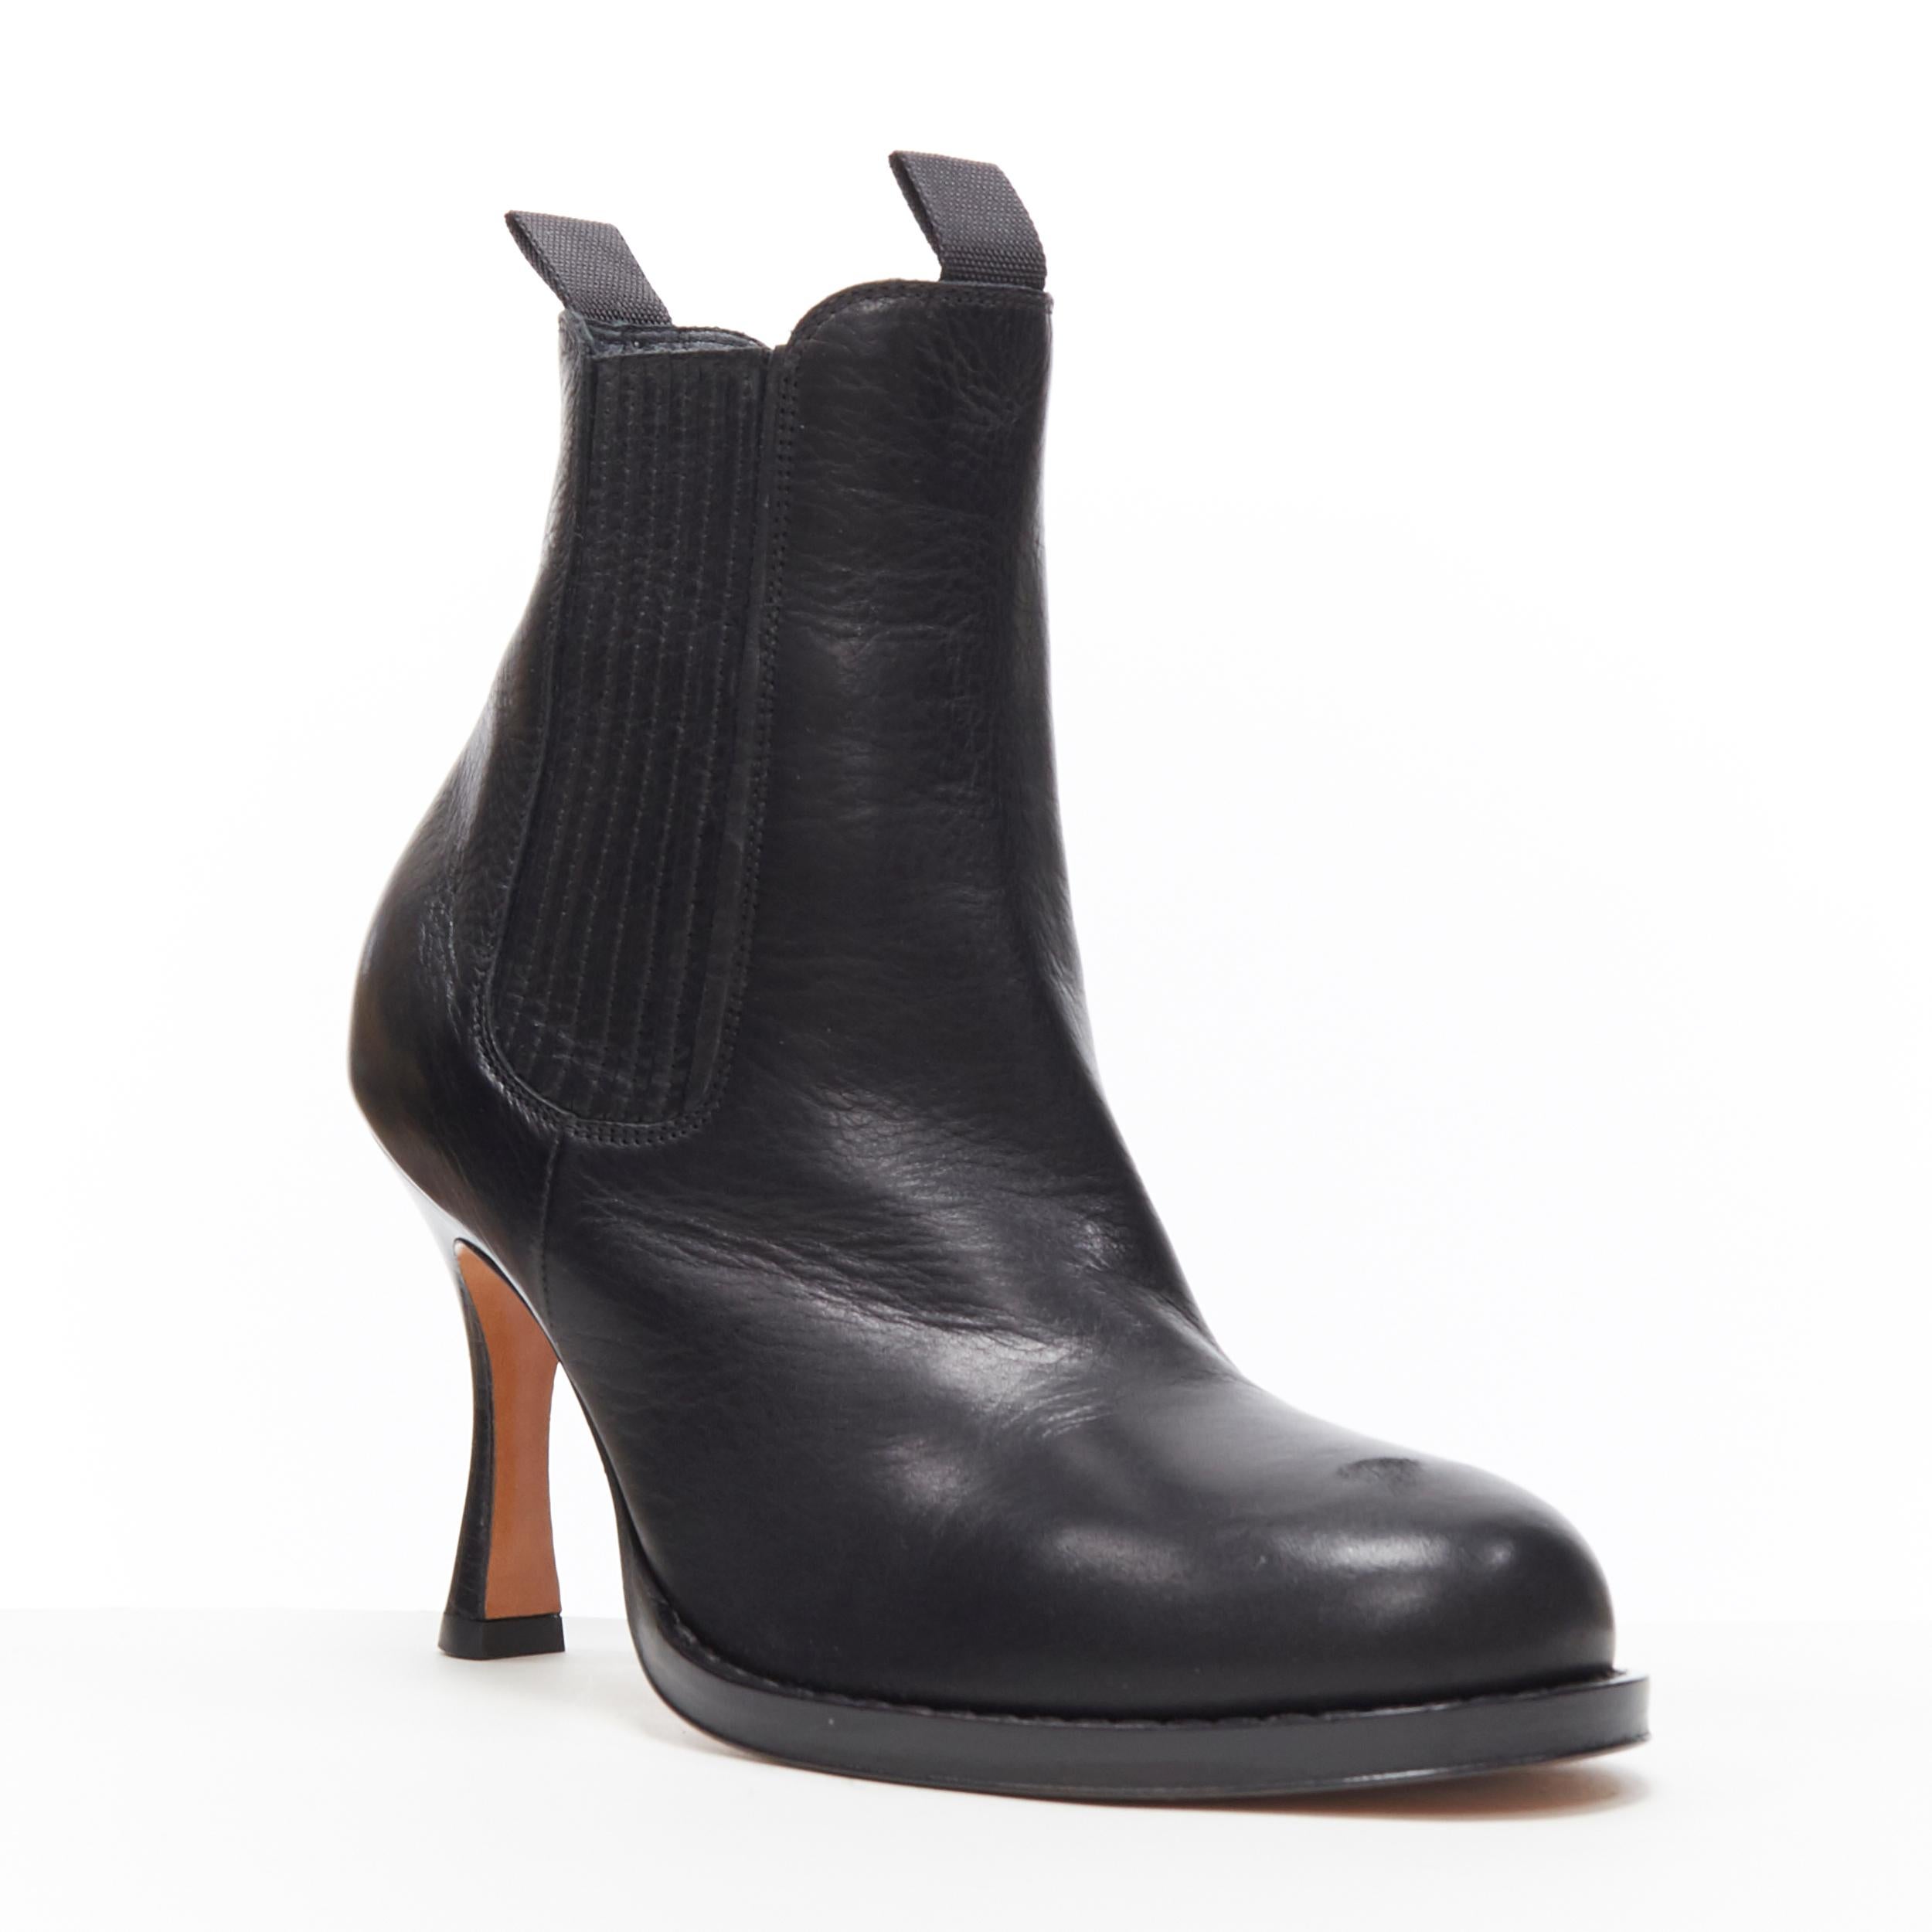 new OLD CELINE PHILO Chelsea Boot 85 black curved toe calfskin heel boots EU37
Brand: Celine
Designer: Phoebe Philo
Model Name / Style: Chelsea Boot 85
Material: Leather
Color: Black
Pattern: Solid
Closure: Pull on
Extra Detail: High (3-3.9 in) heel